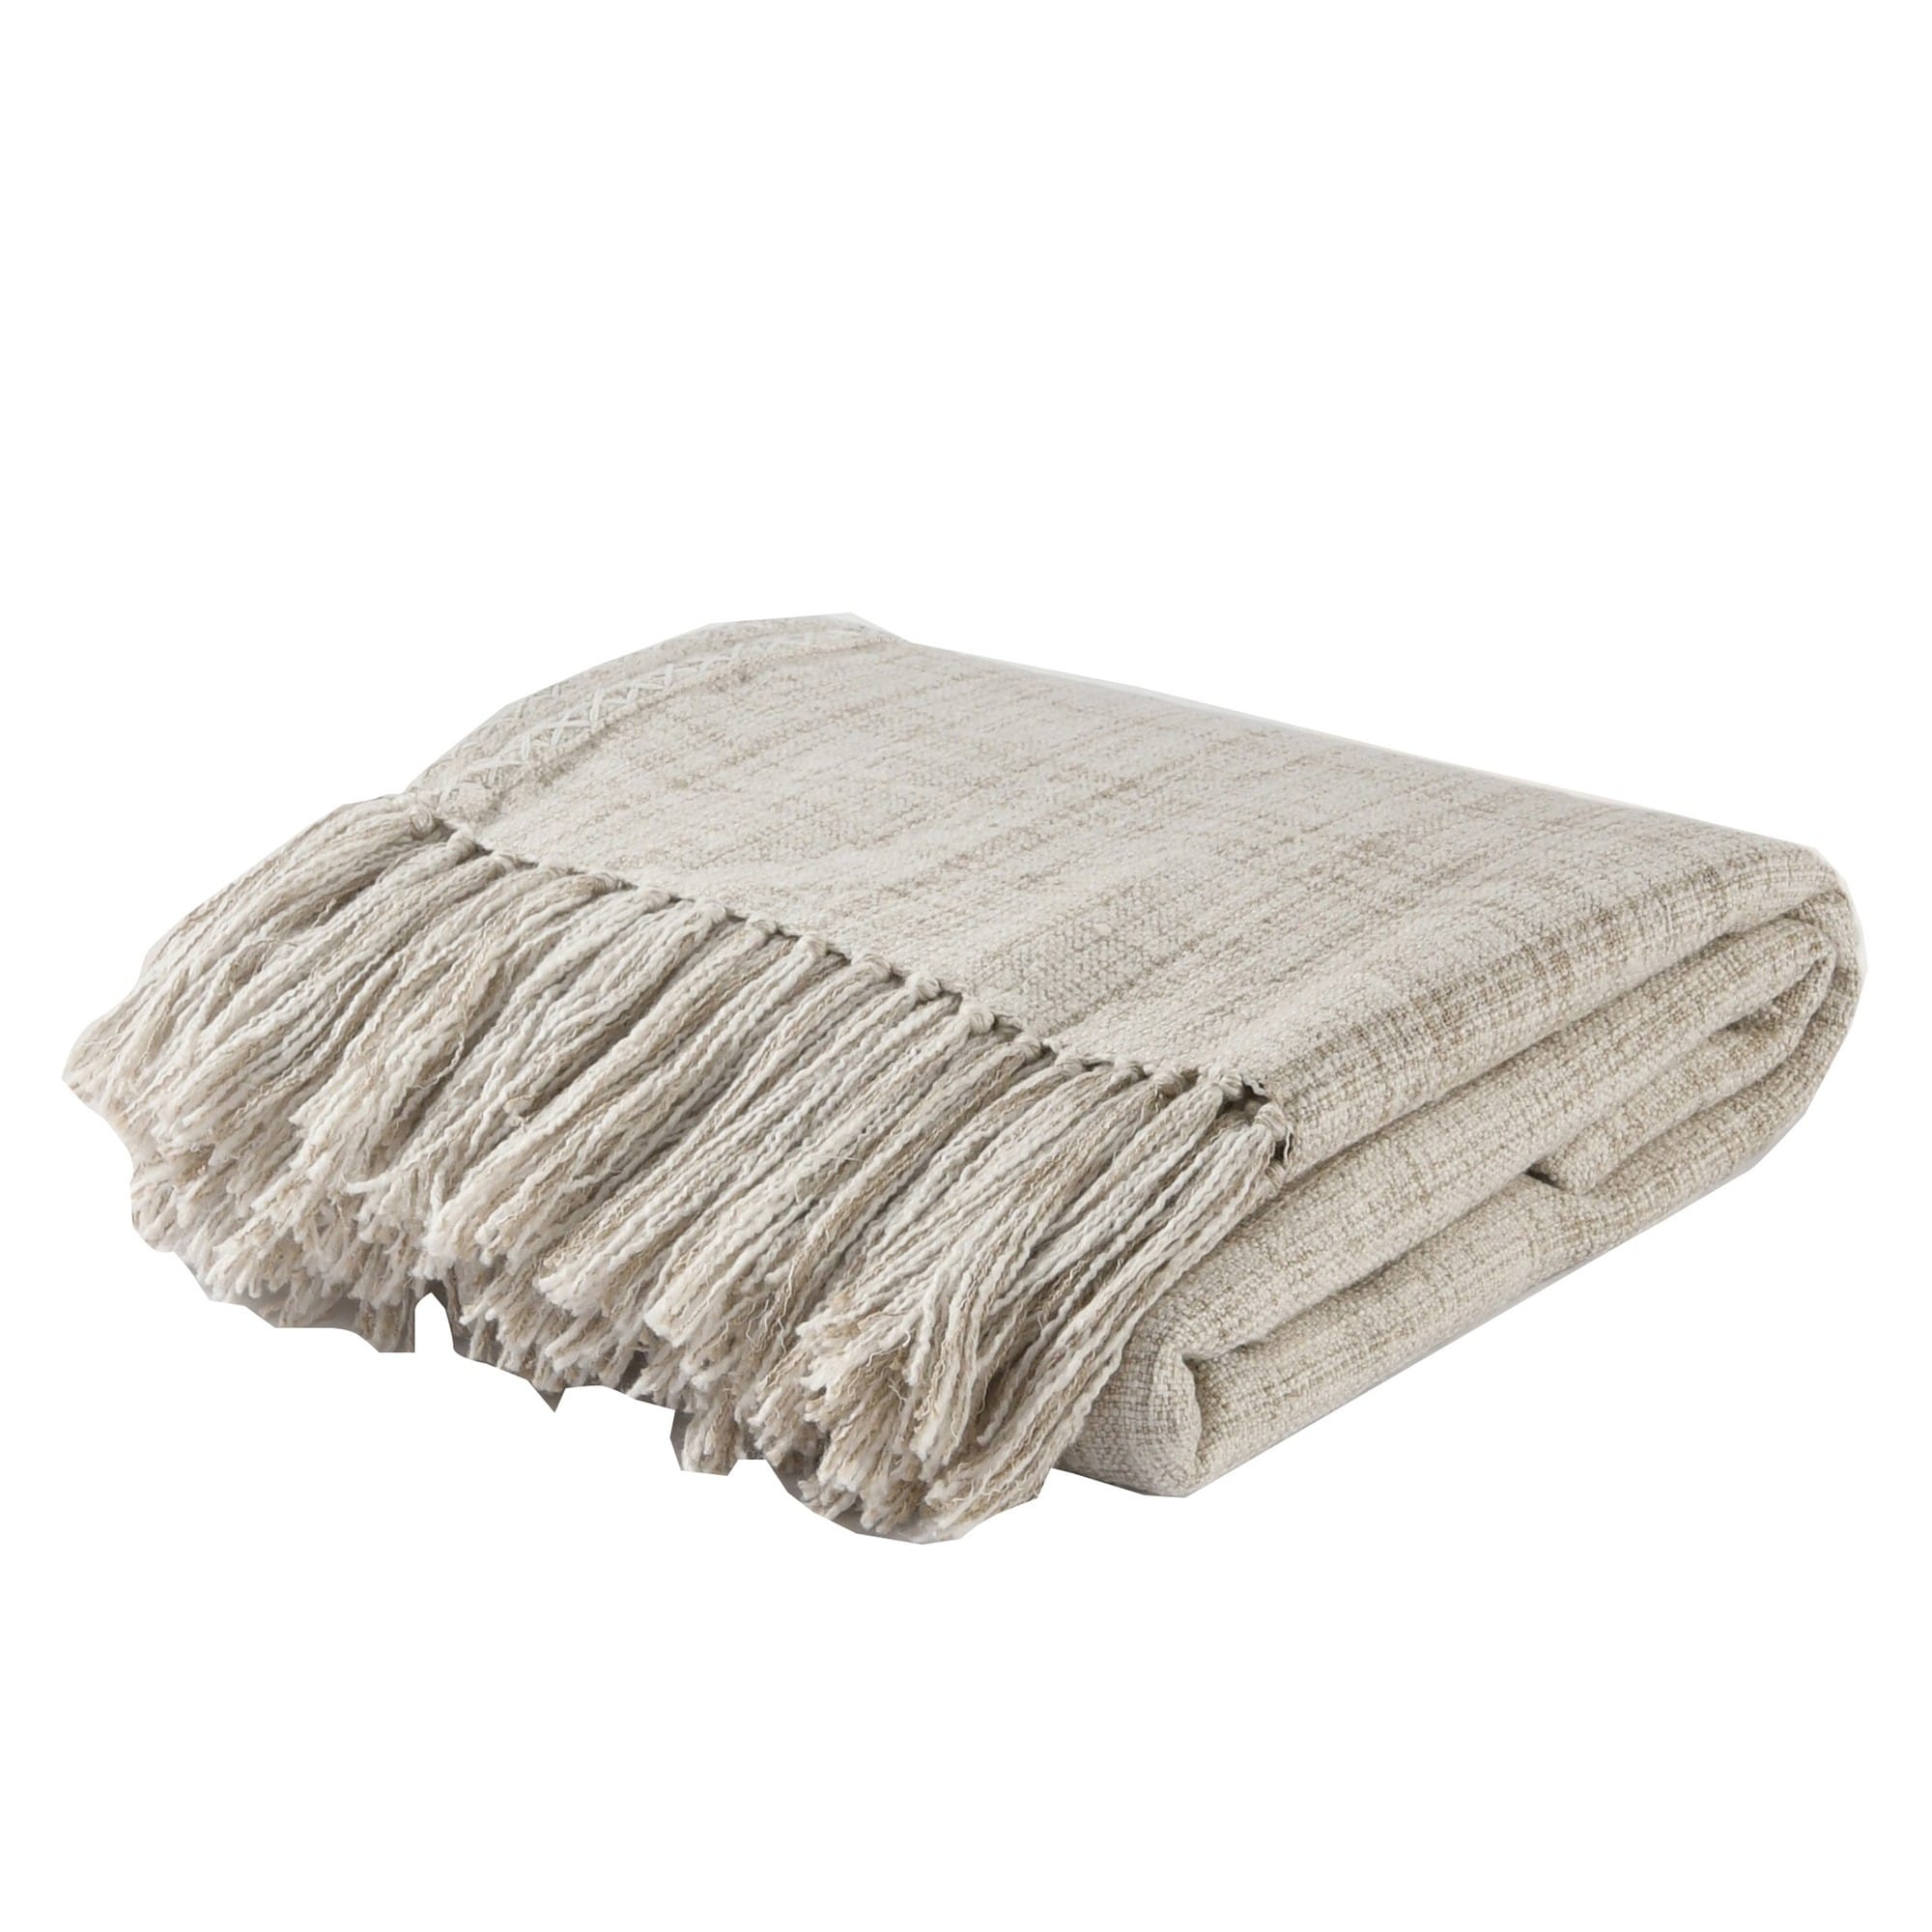 Fabric Throw Blanket with Woven Ends and Fringes, Off White